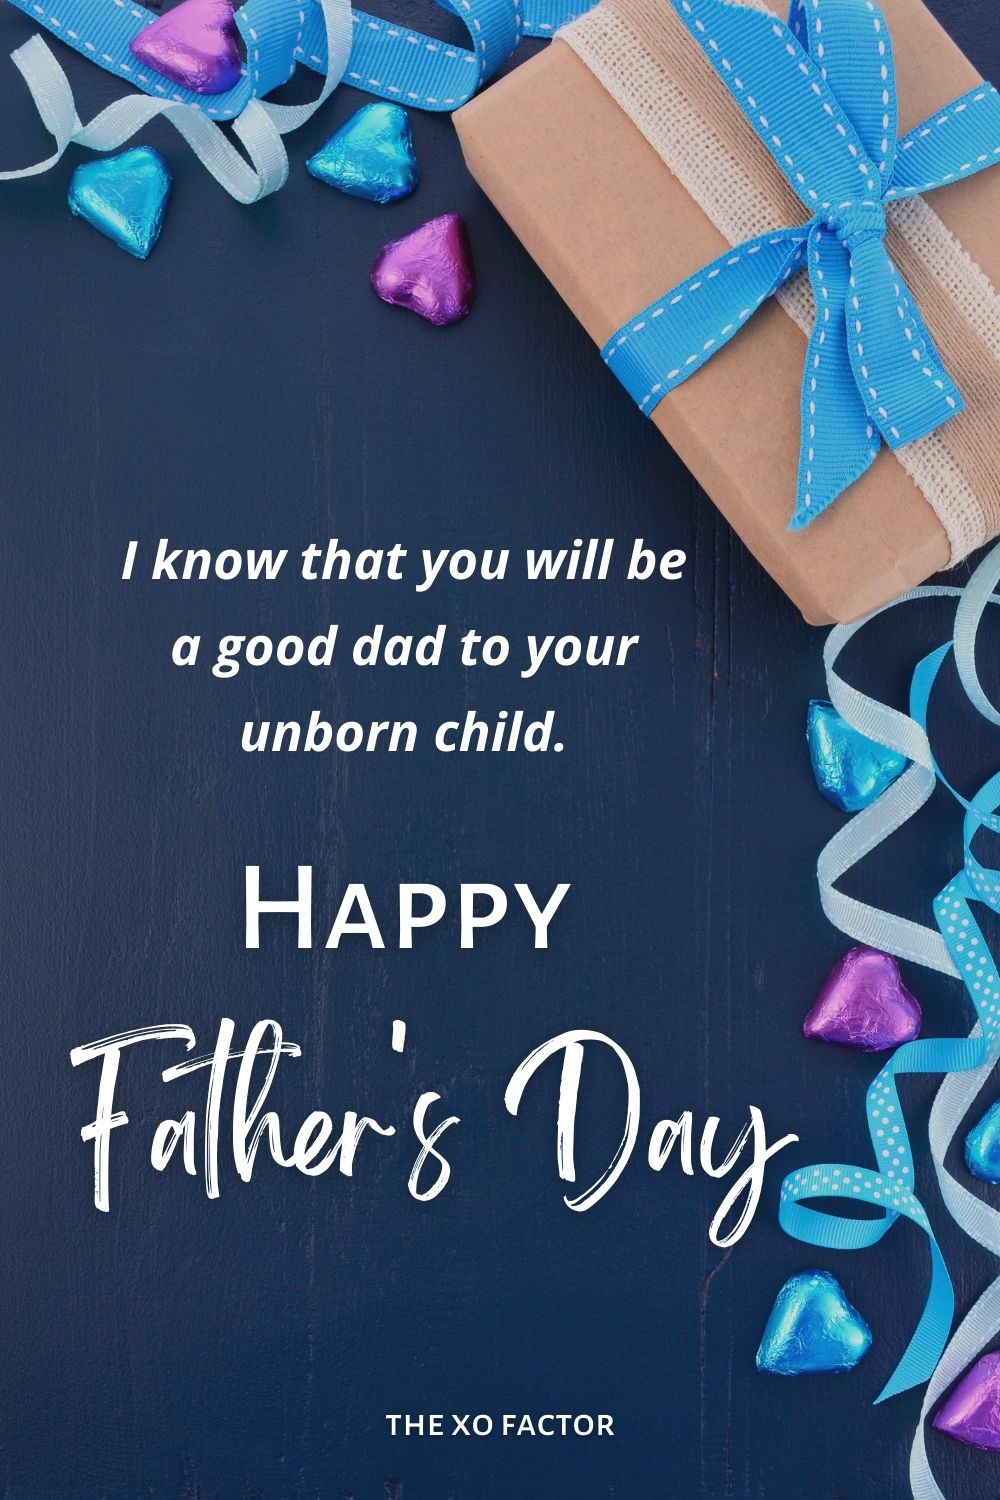 Happy Father's Day, I know that you will be a good dad to your unborn child.